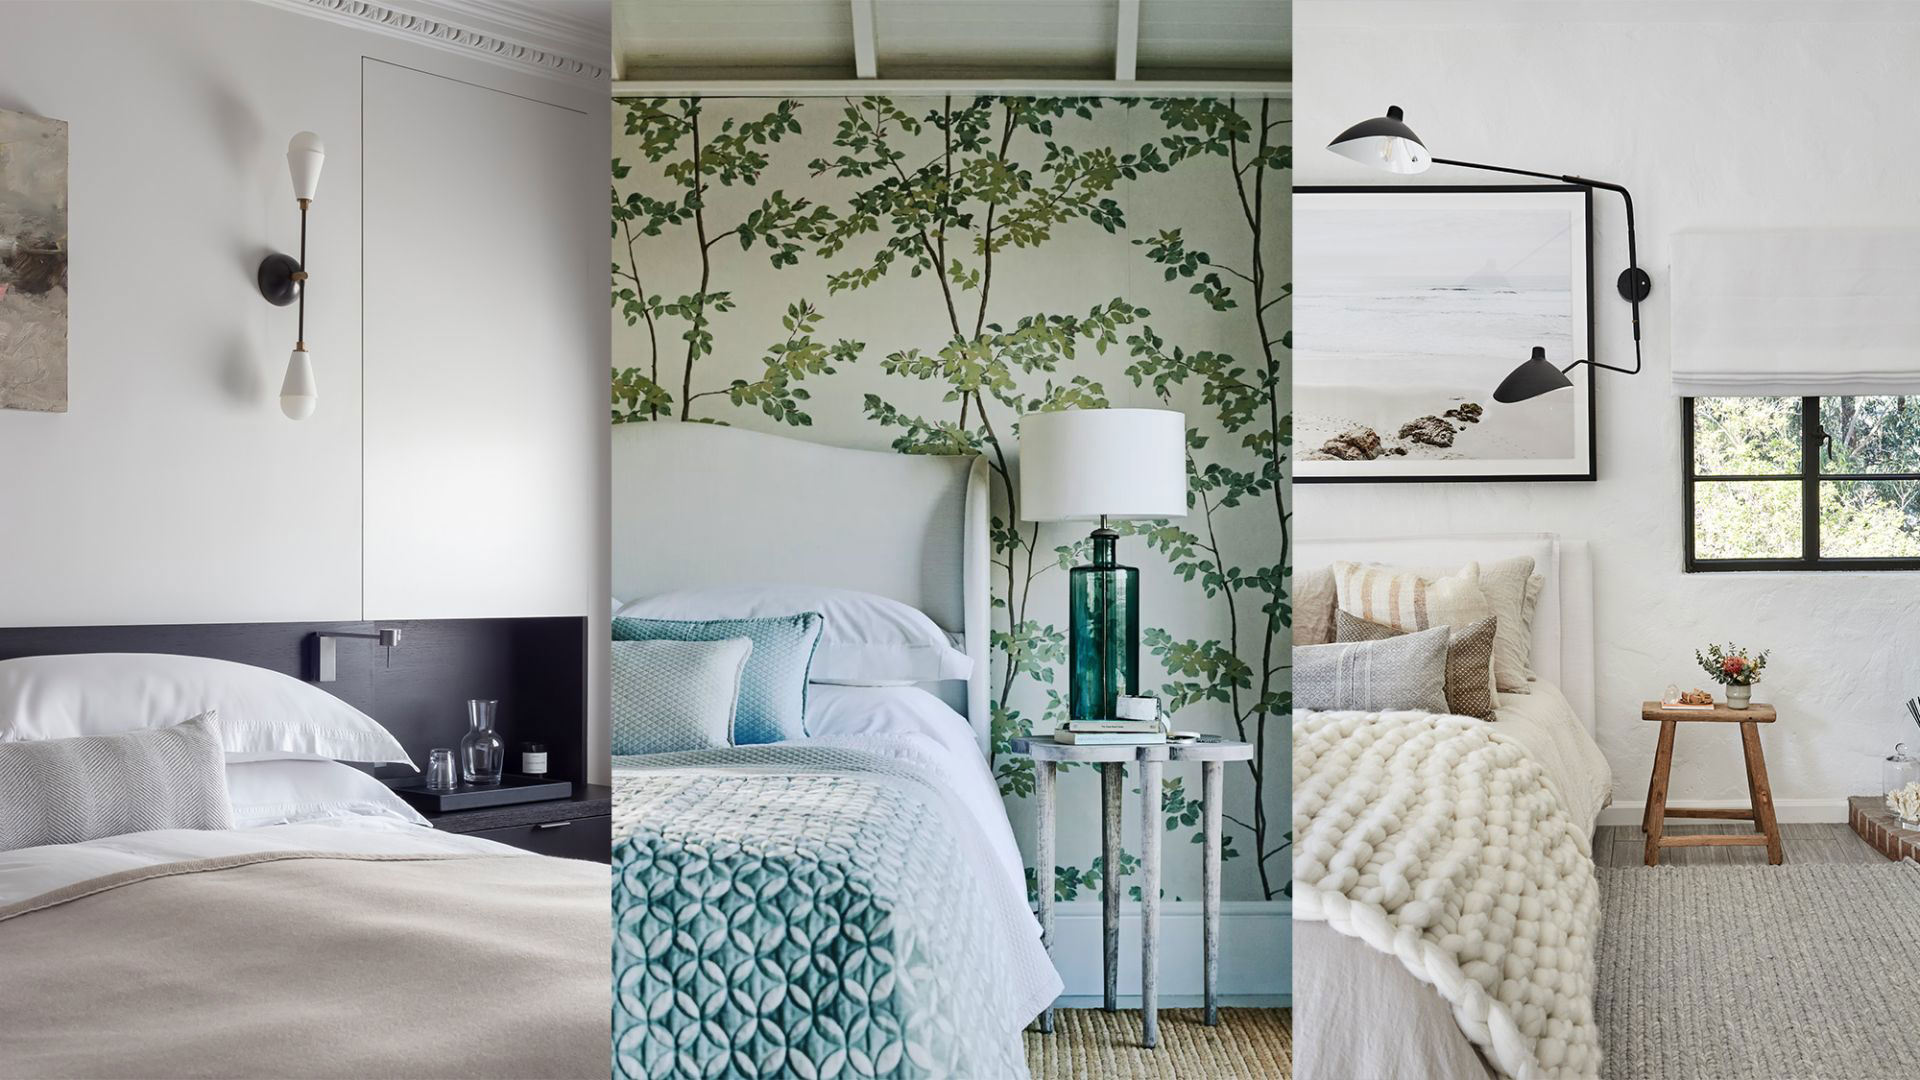 Aesthetic bedroom ideas – 10 inspiring looks for your sleep space